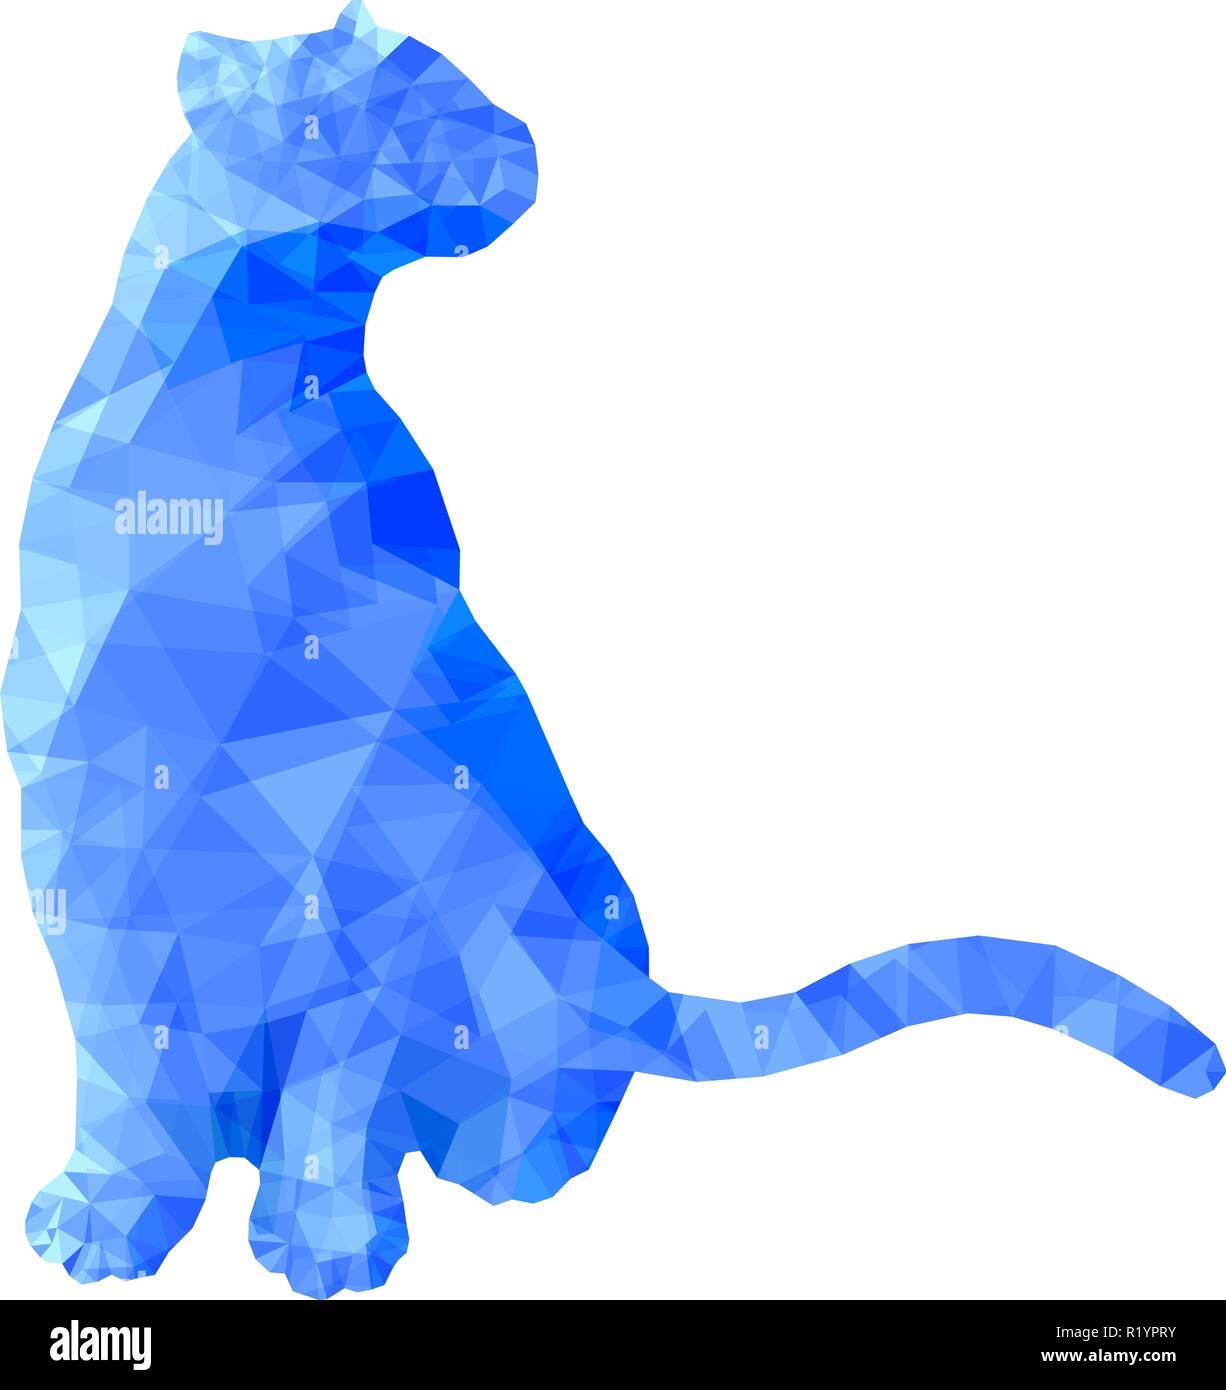 Poly animal cat sitting in blue polygonal abstract vector illustration Stock Vector